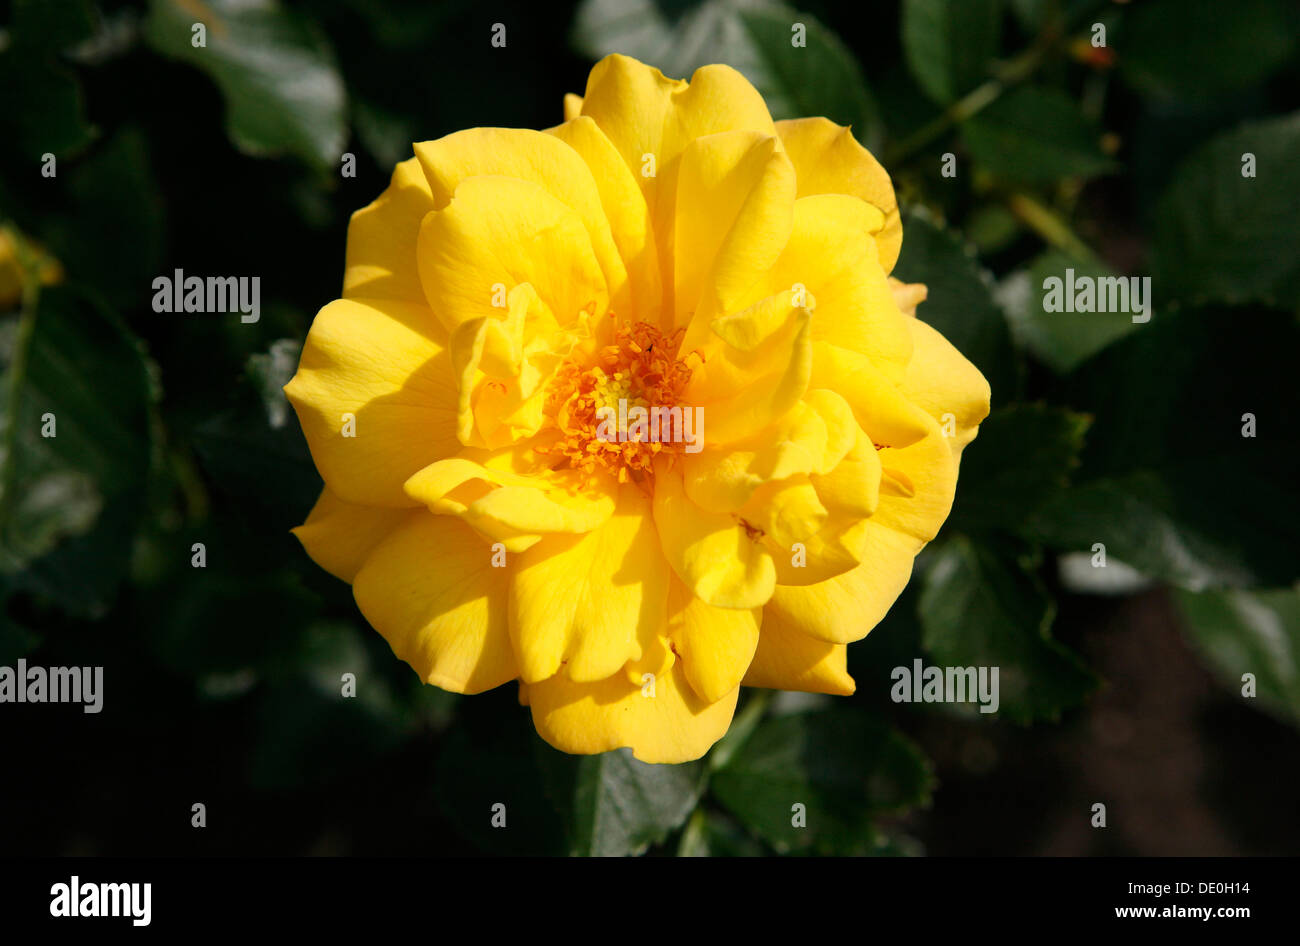 Blooming yellow rose (Rosa) Banque D'Images